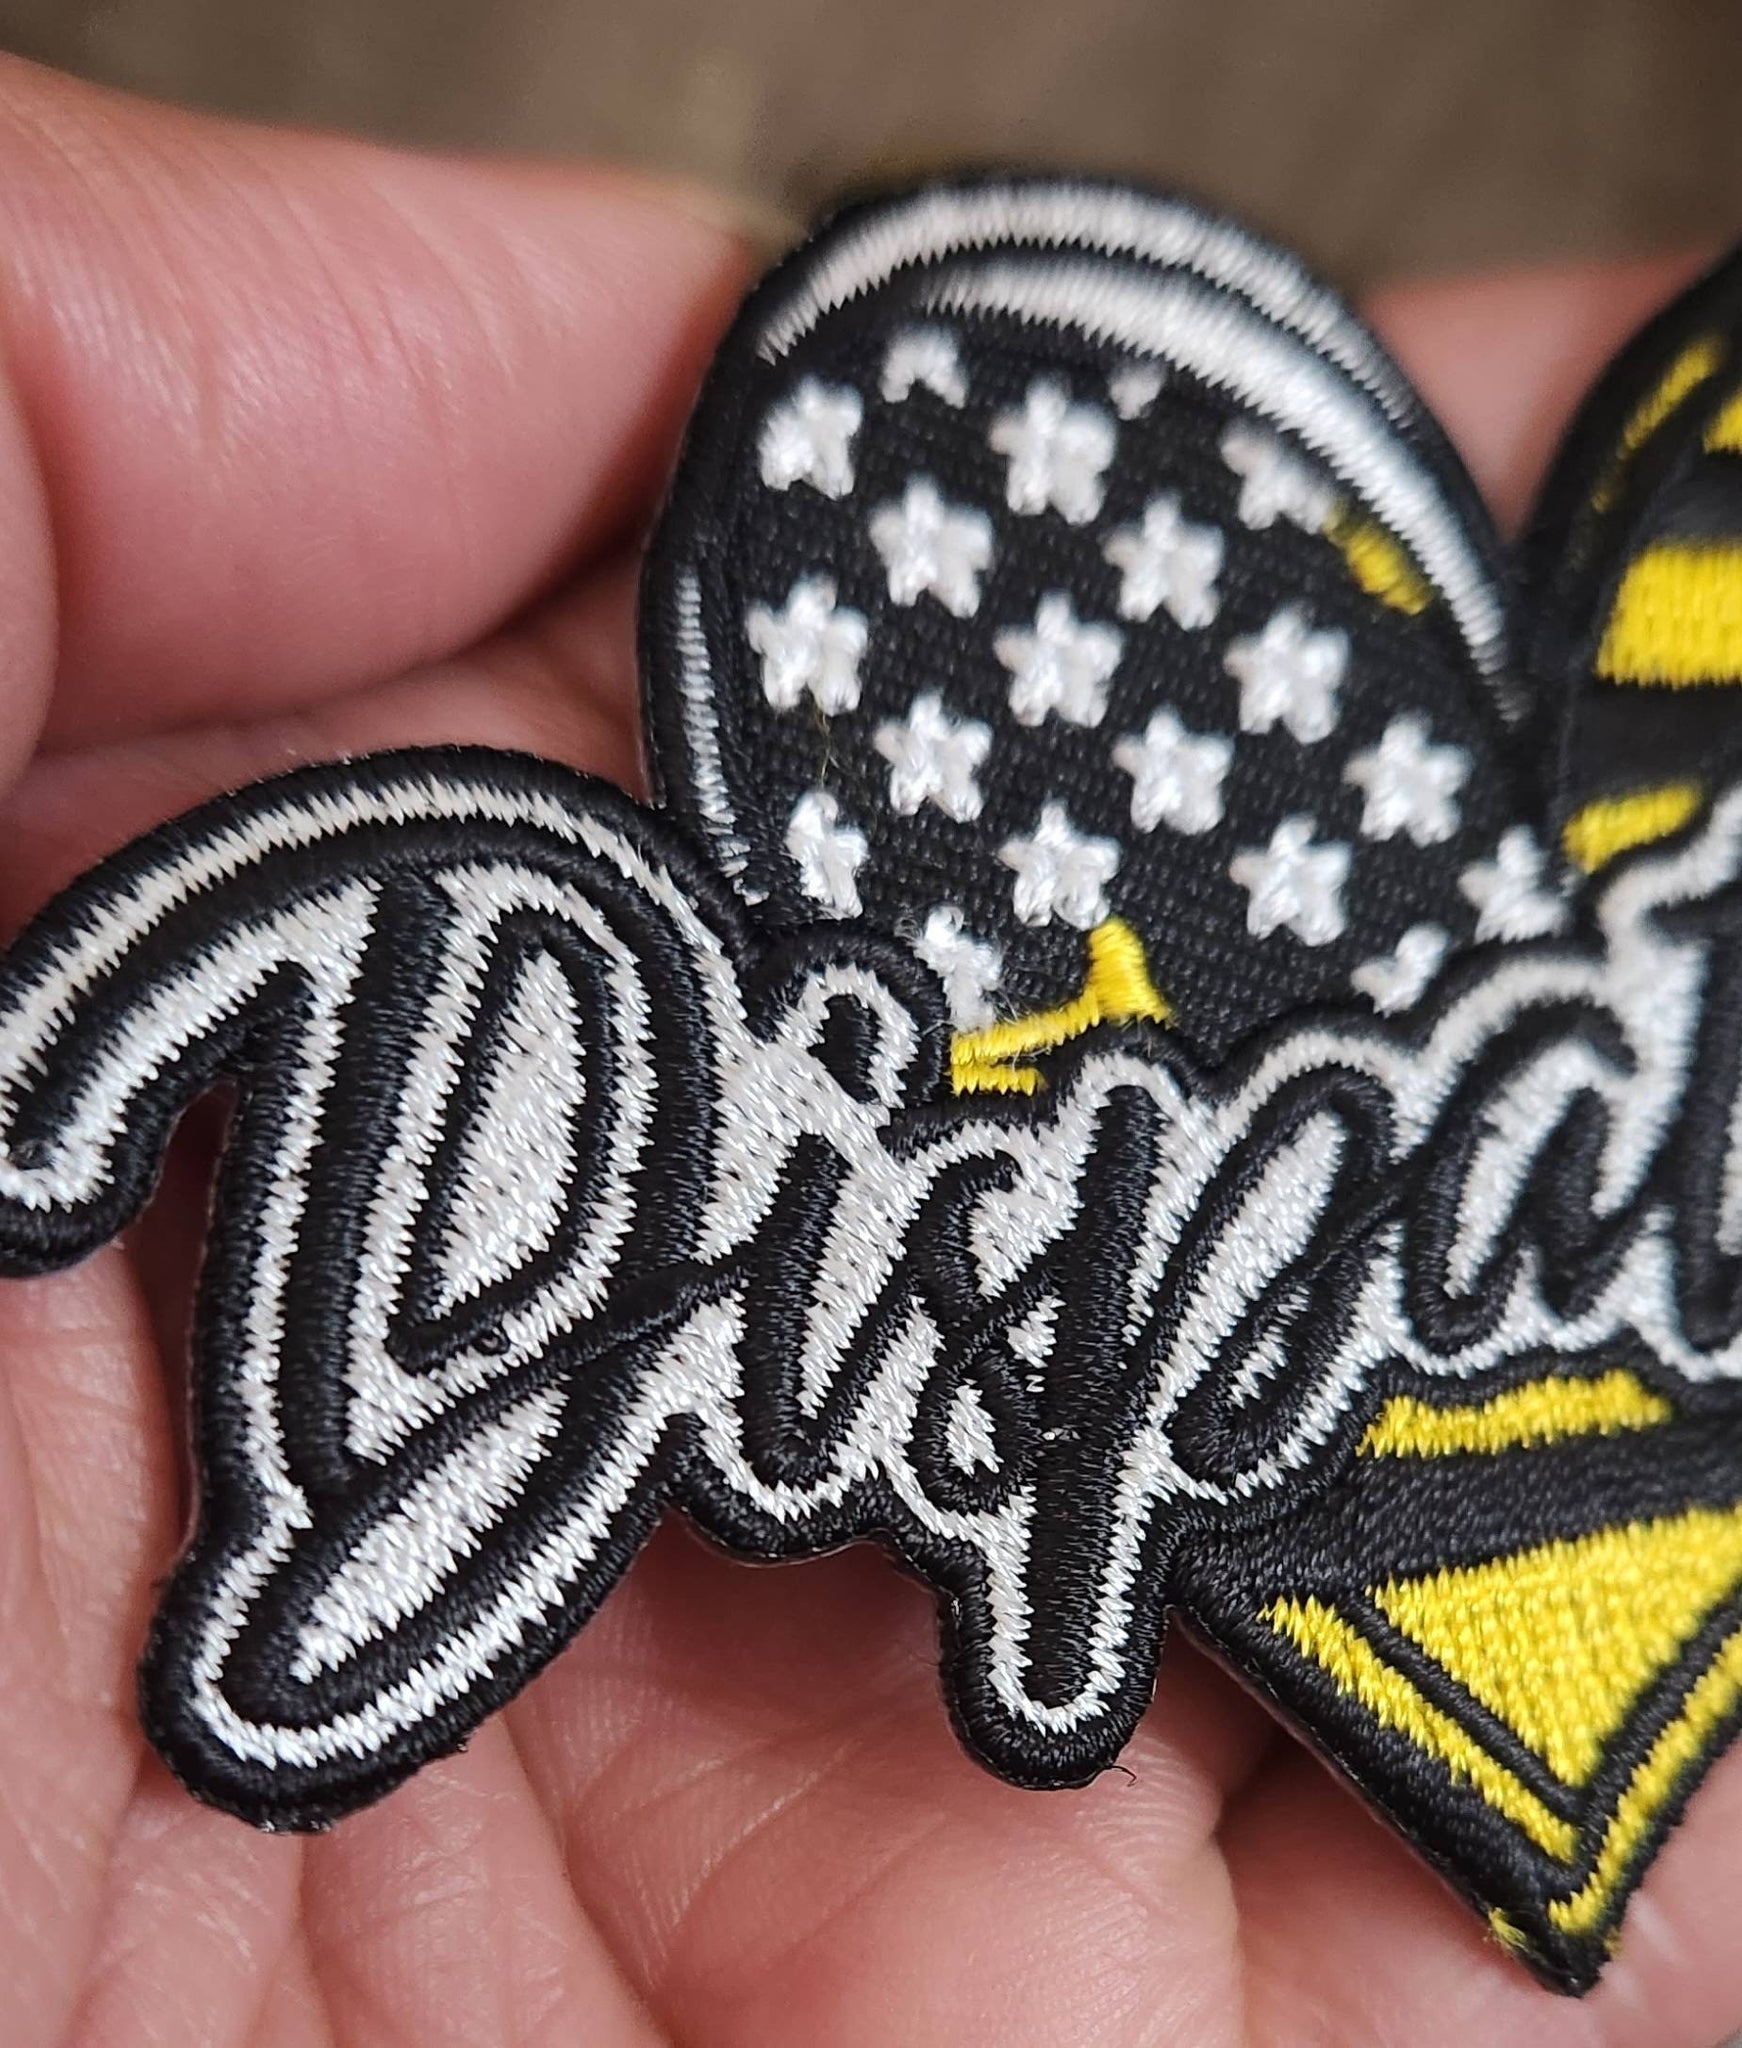 NEW Arrival, 1-pc "Dispatcher Heart" Patch for 911 Dispatcher, First Responder Patch, Gifts for Dispatcher, Iron-on Applique, Size 3.75"